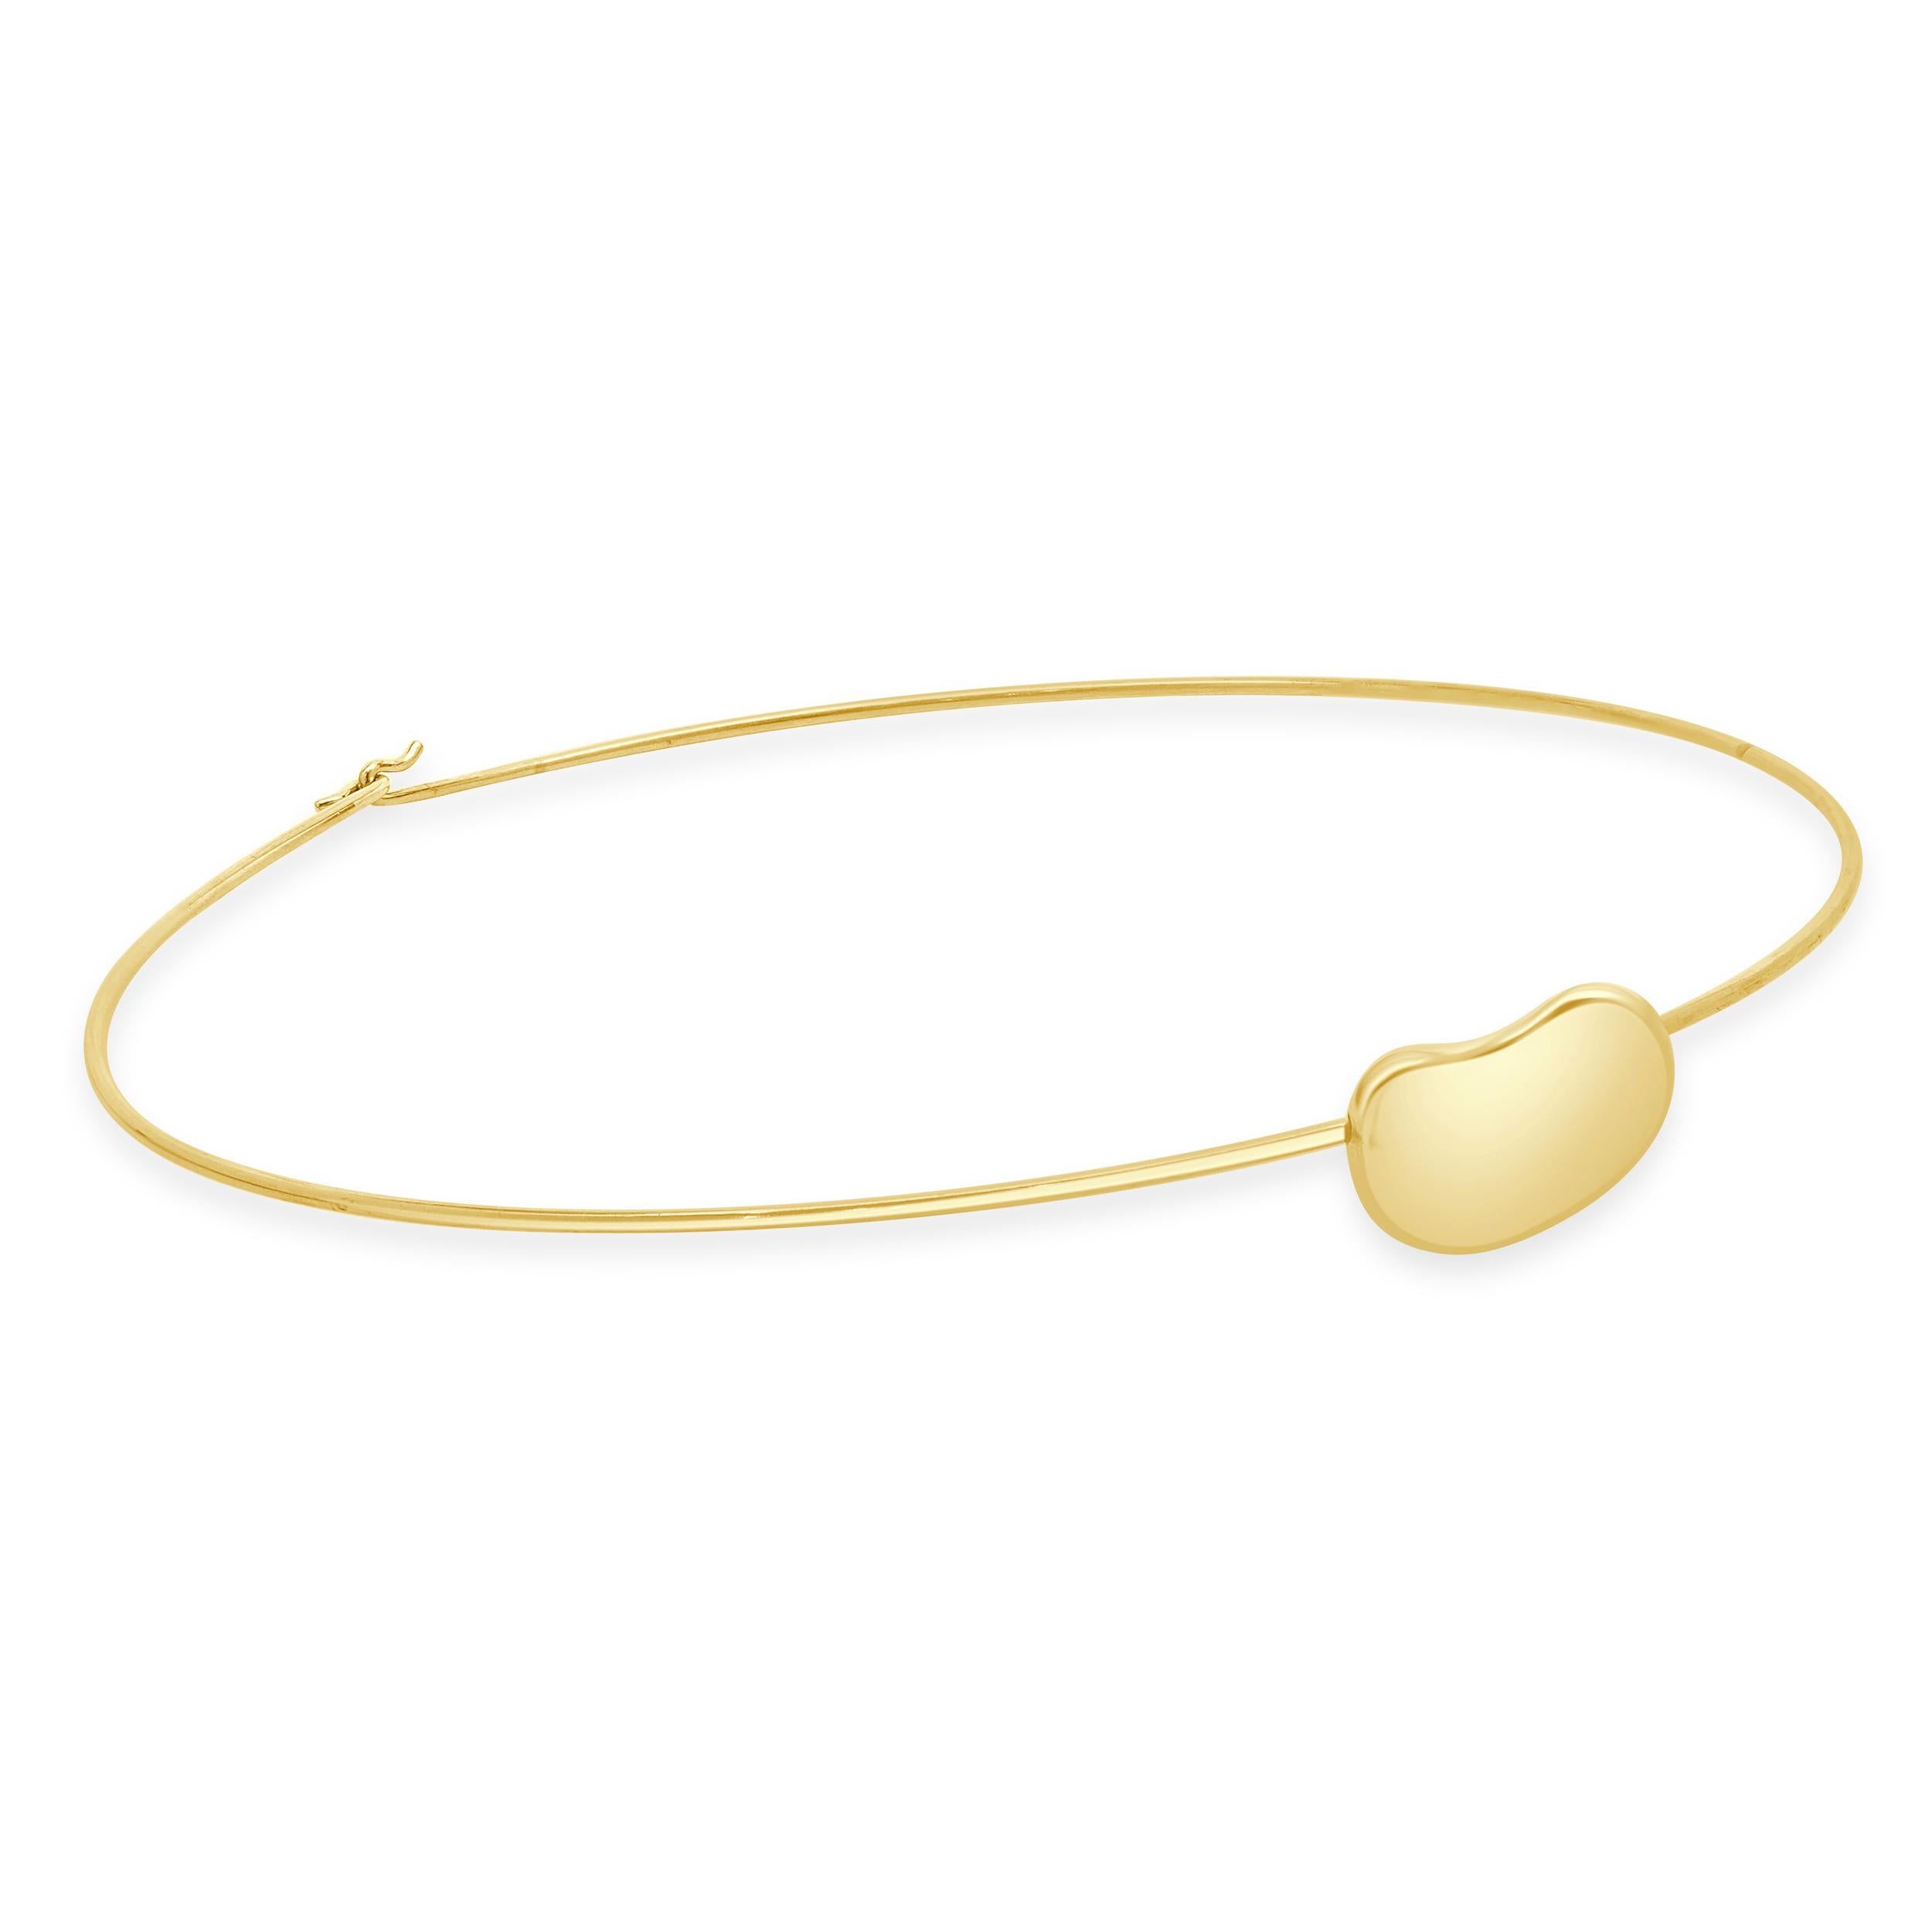 Designer: Tiffany & Co. 
Material: 18K yellow gold
Dimensions: necklace measures 16-inches in length
Weight: 23 grams